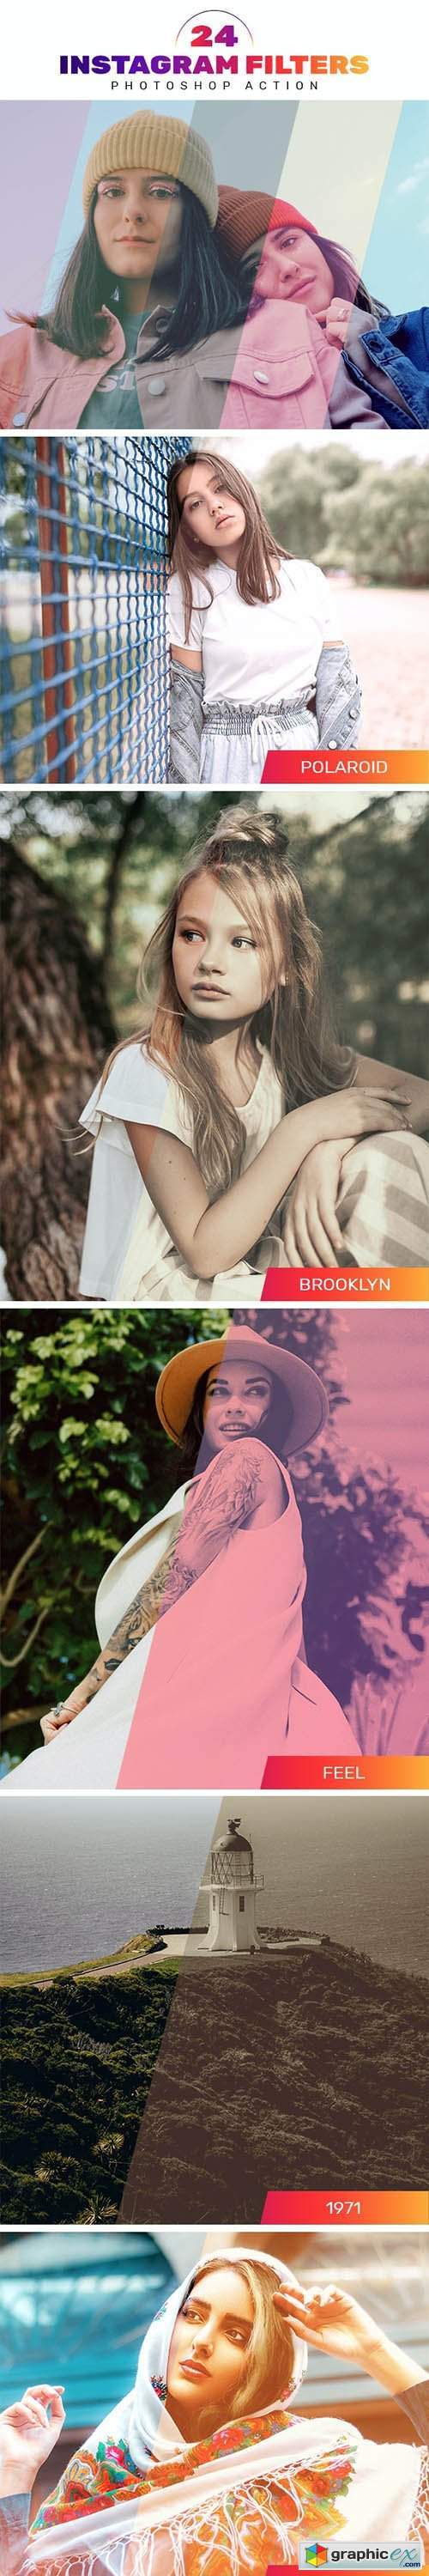 24 Instagram Filters Photoshop Actions